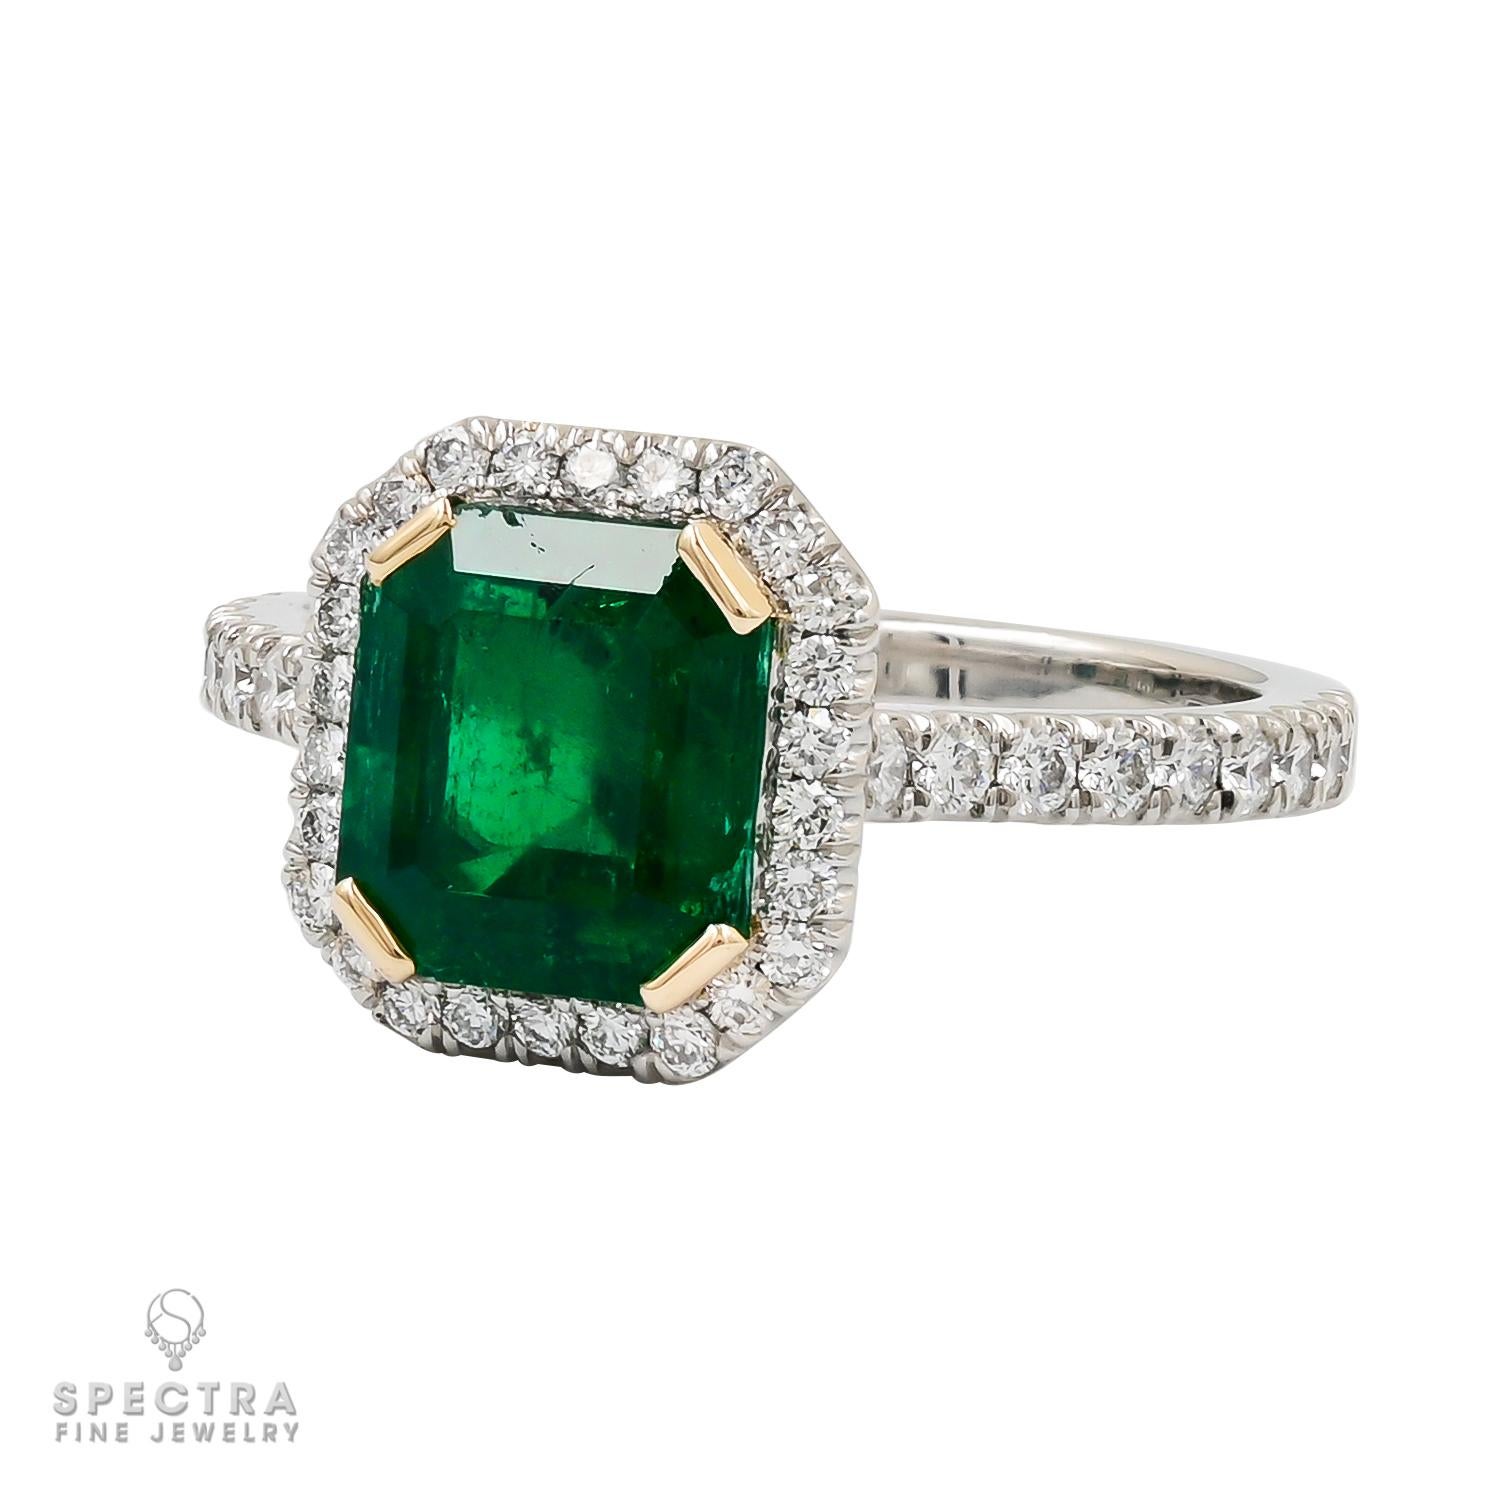 Spectra Fine Jewelry, celebrated for its unwavering commitment to quality and timeless design, proudly presents the 1.92ct Emerald Cut Colombian Emerald Diamond Ring — a testament to luxury, beauty, and the allure of the world's most exceptional